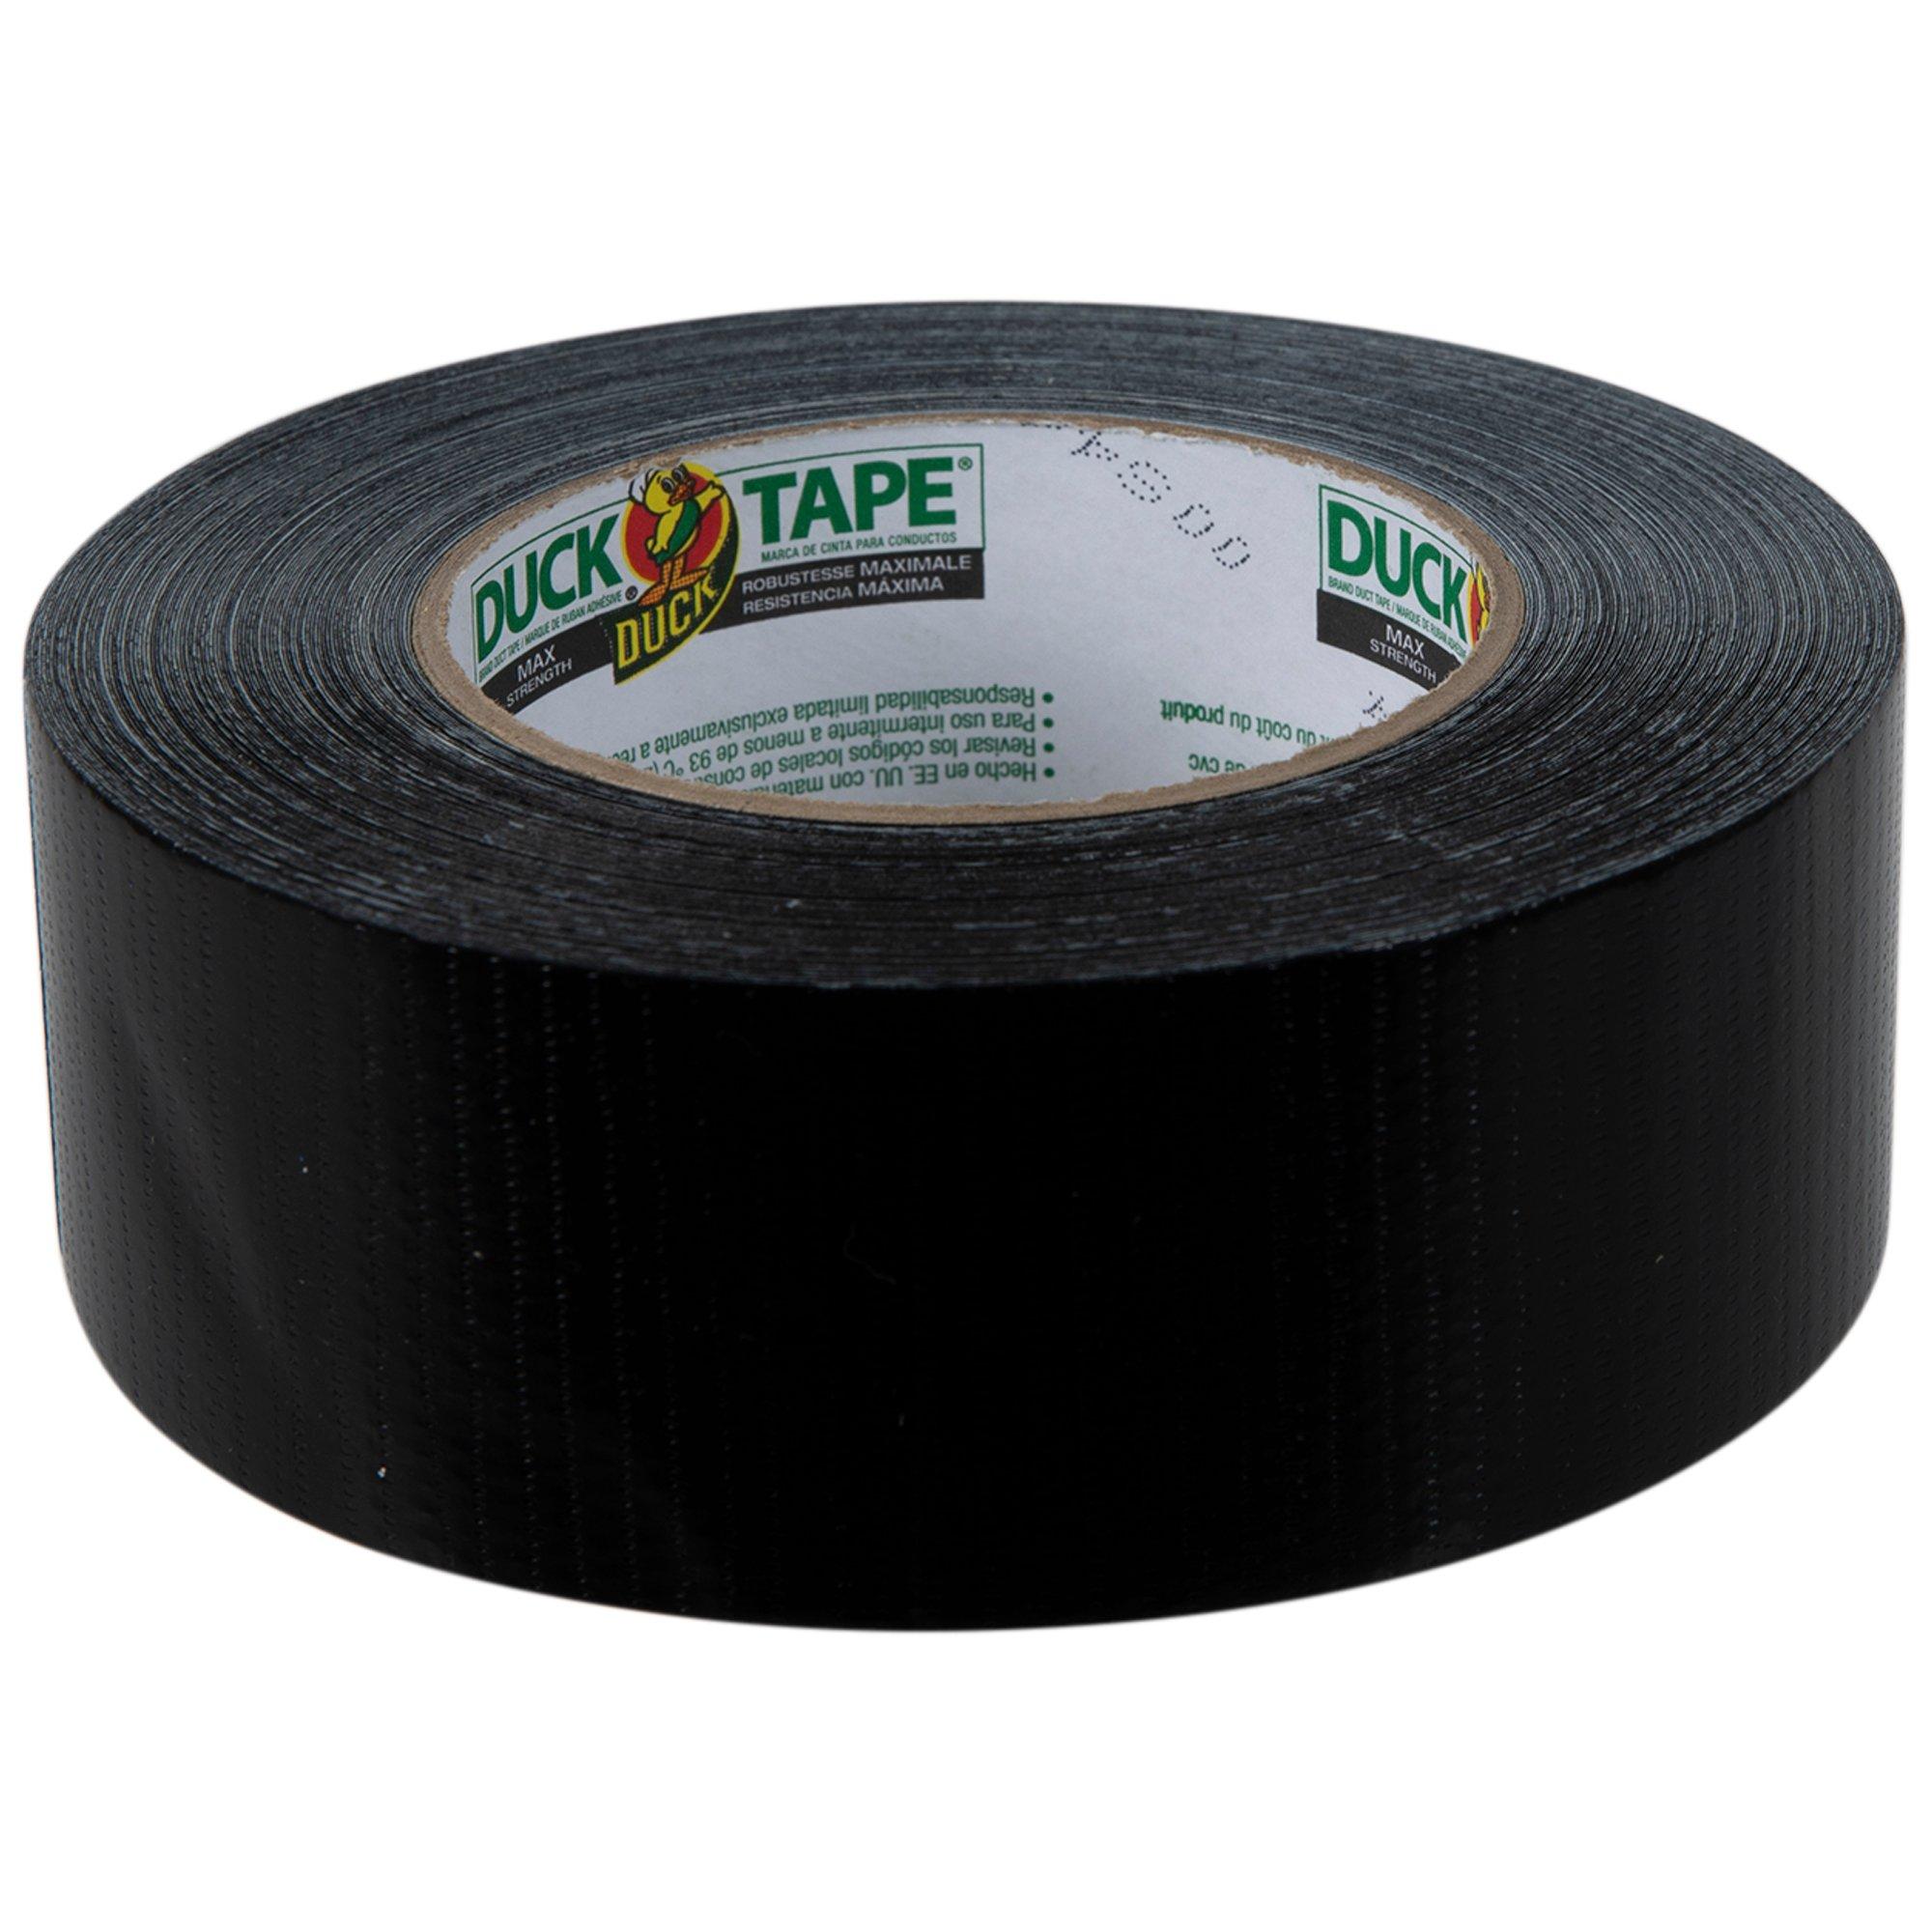 Is it 'duct' or 'duck' tape?